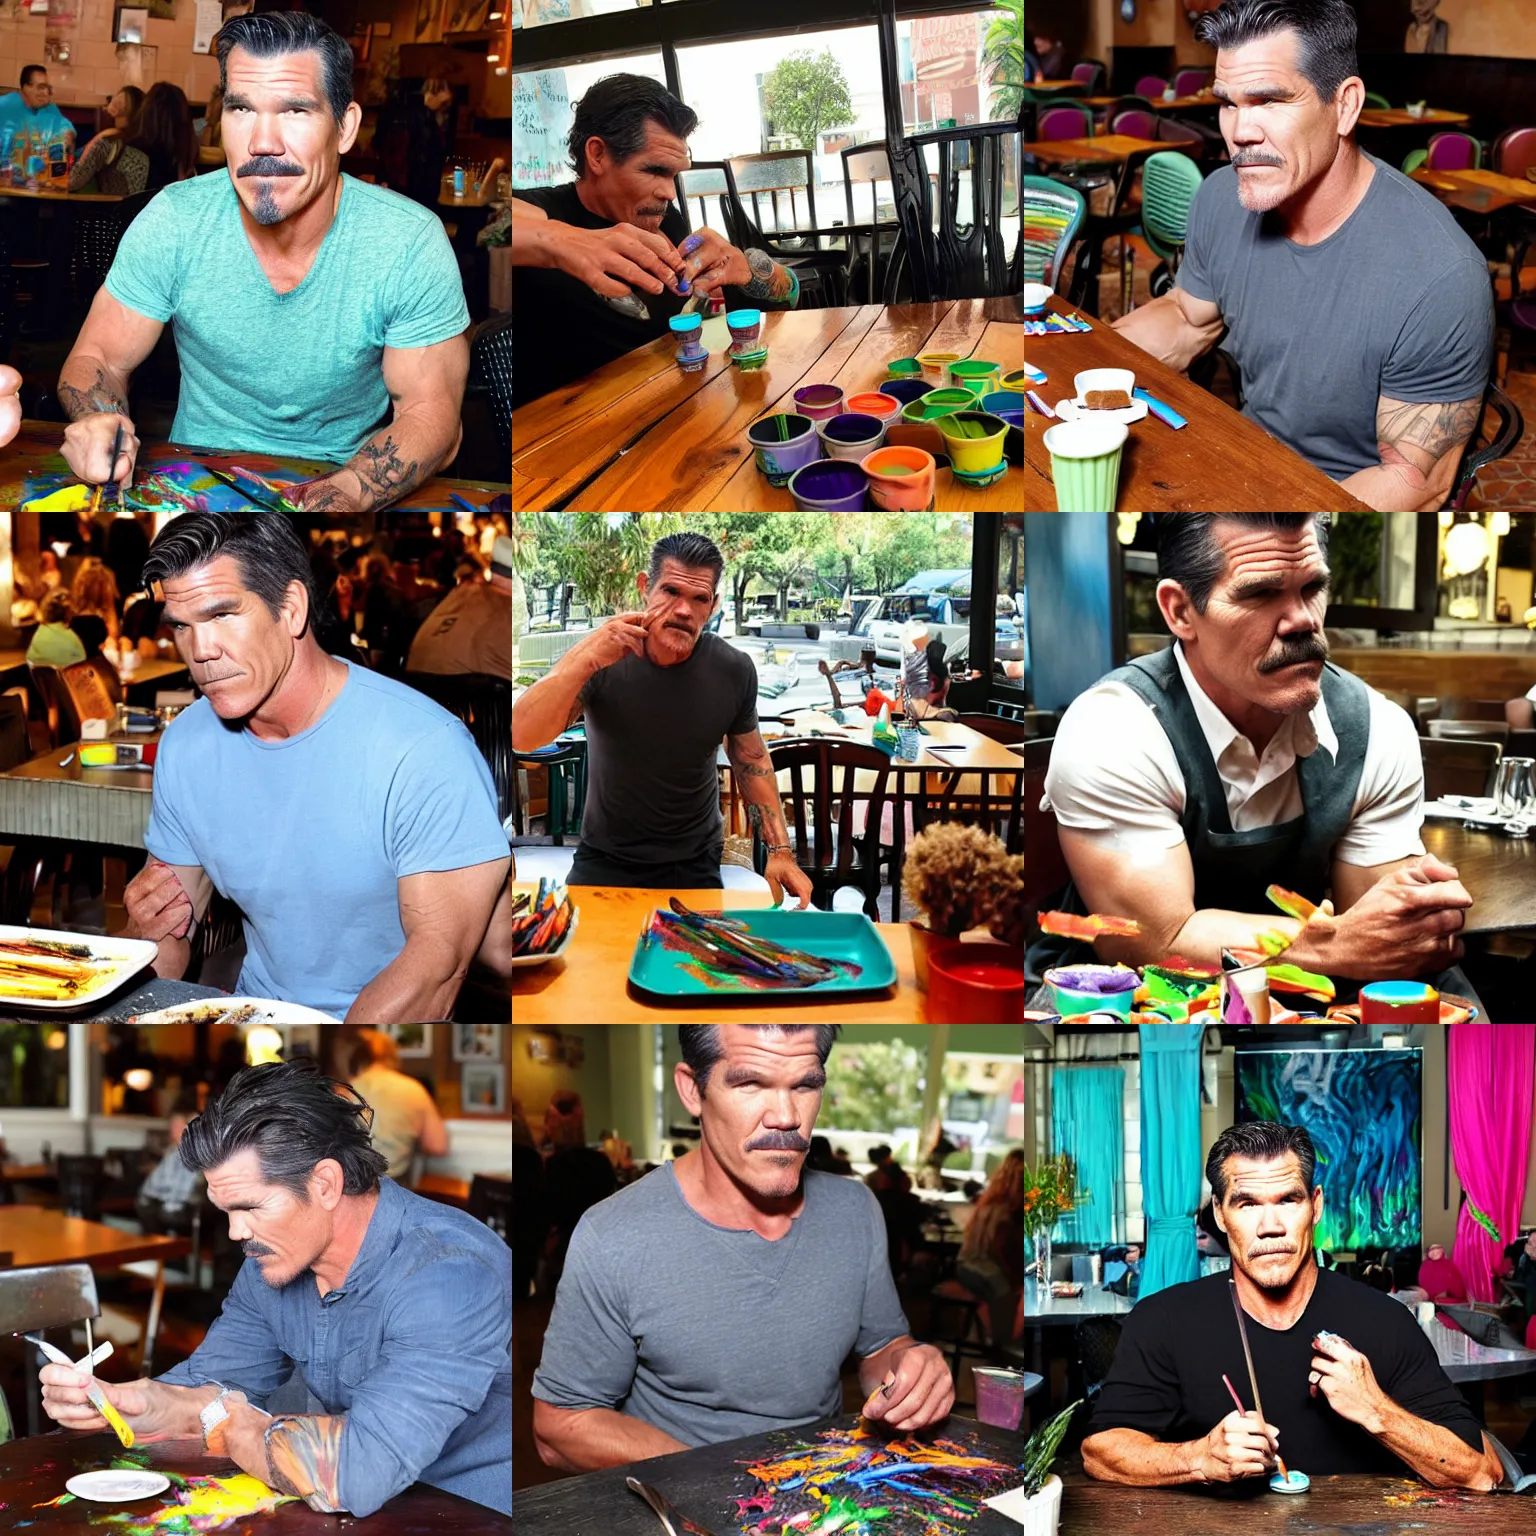 Prompt: Josh Brolin eats melted crayons at table in cafe, photograph